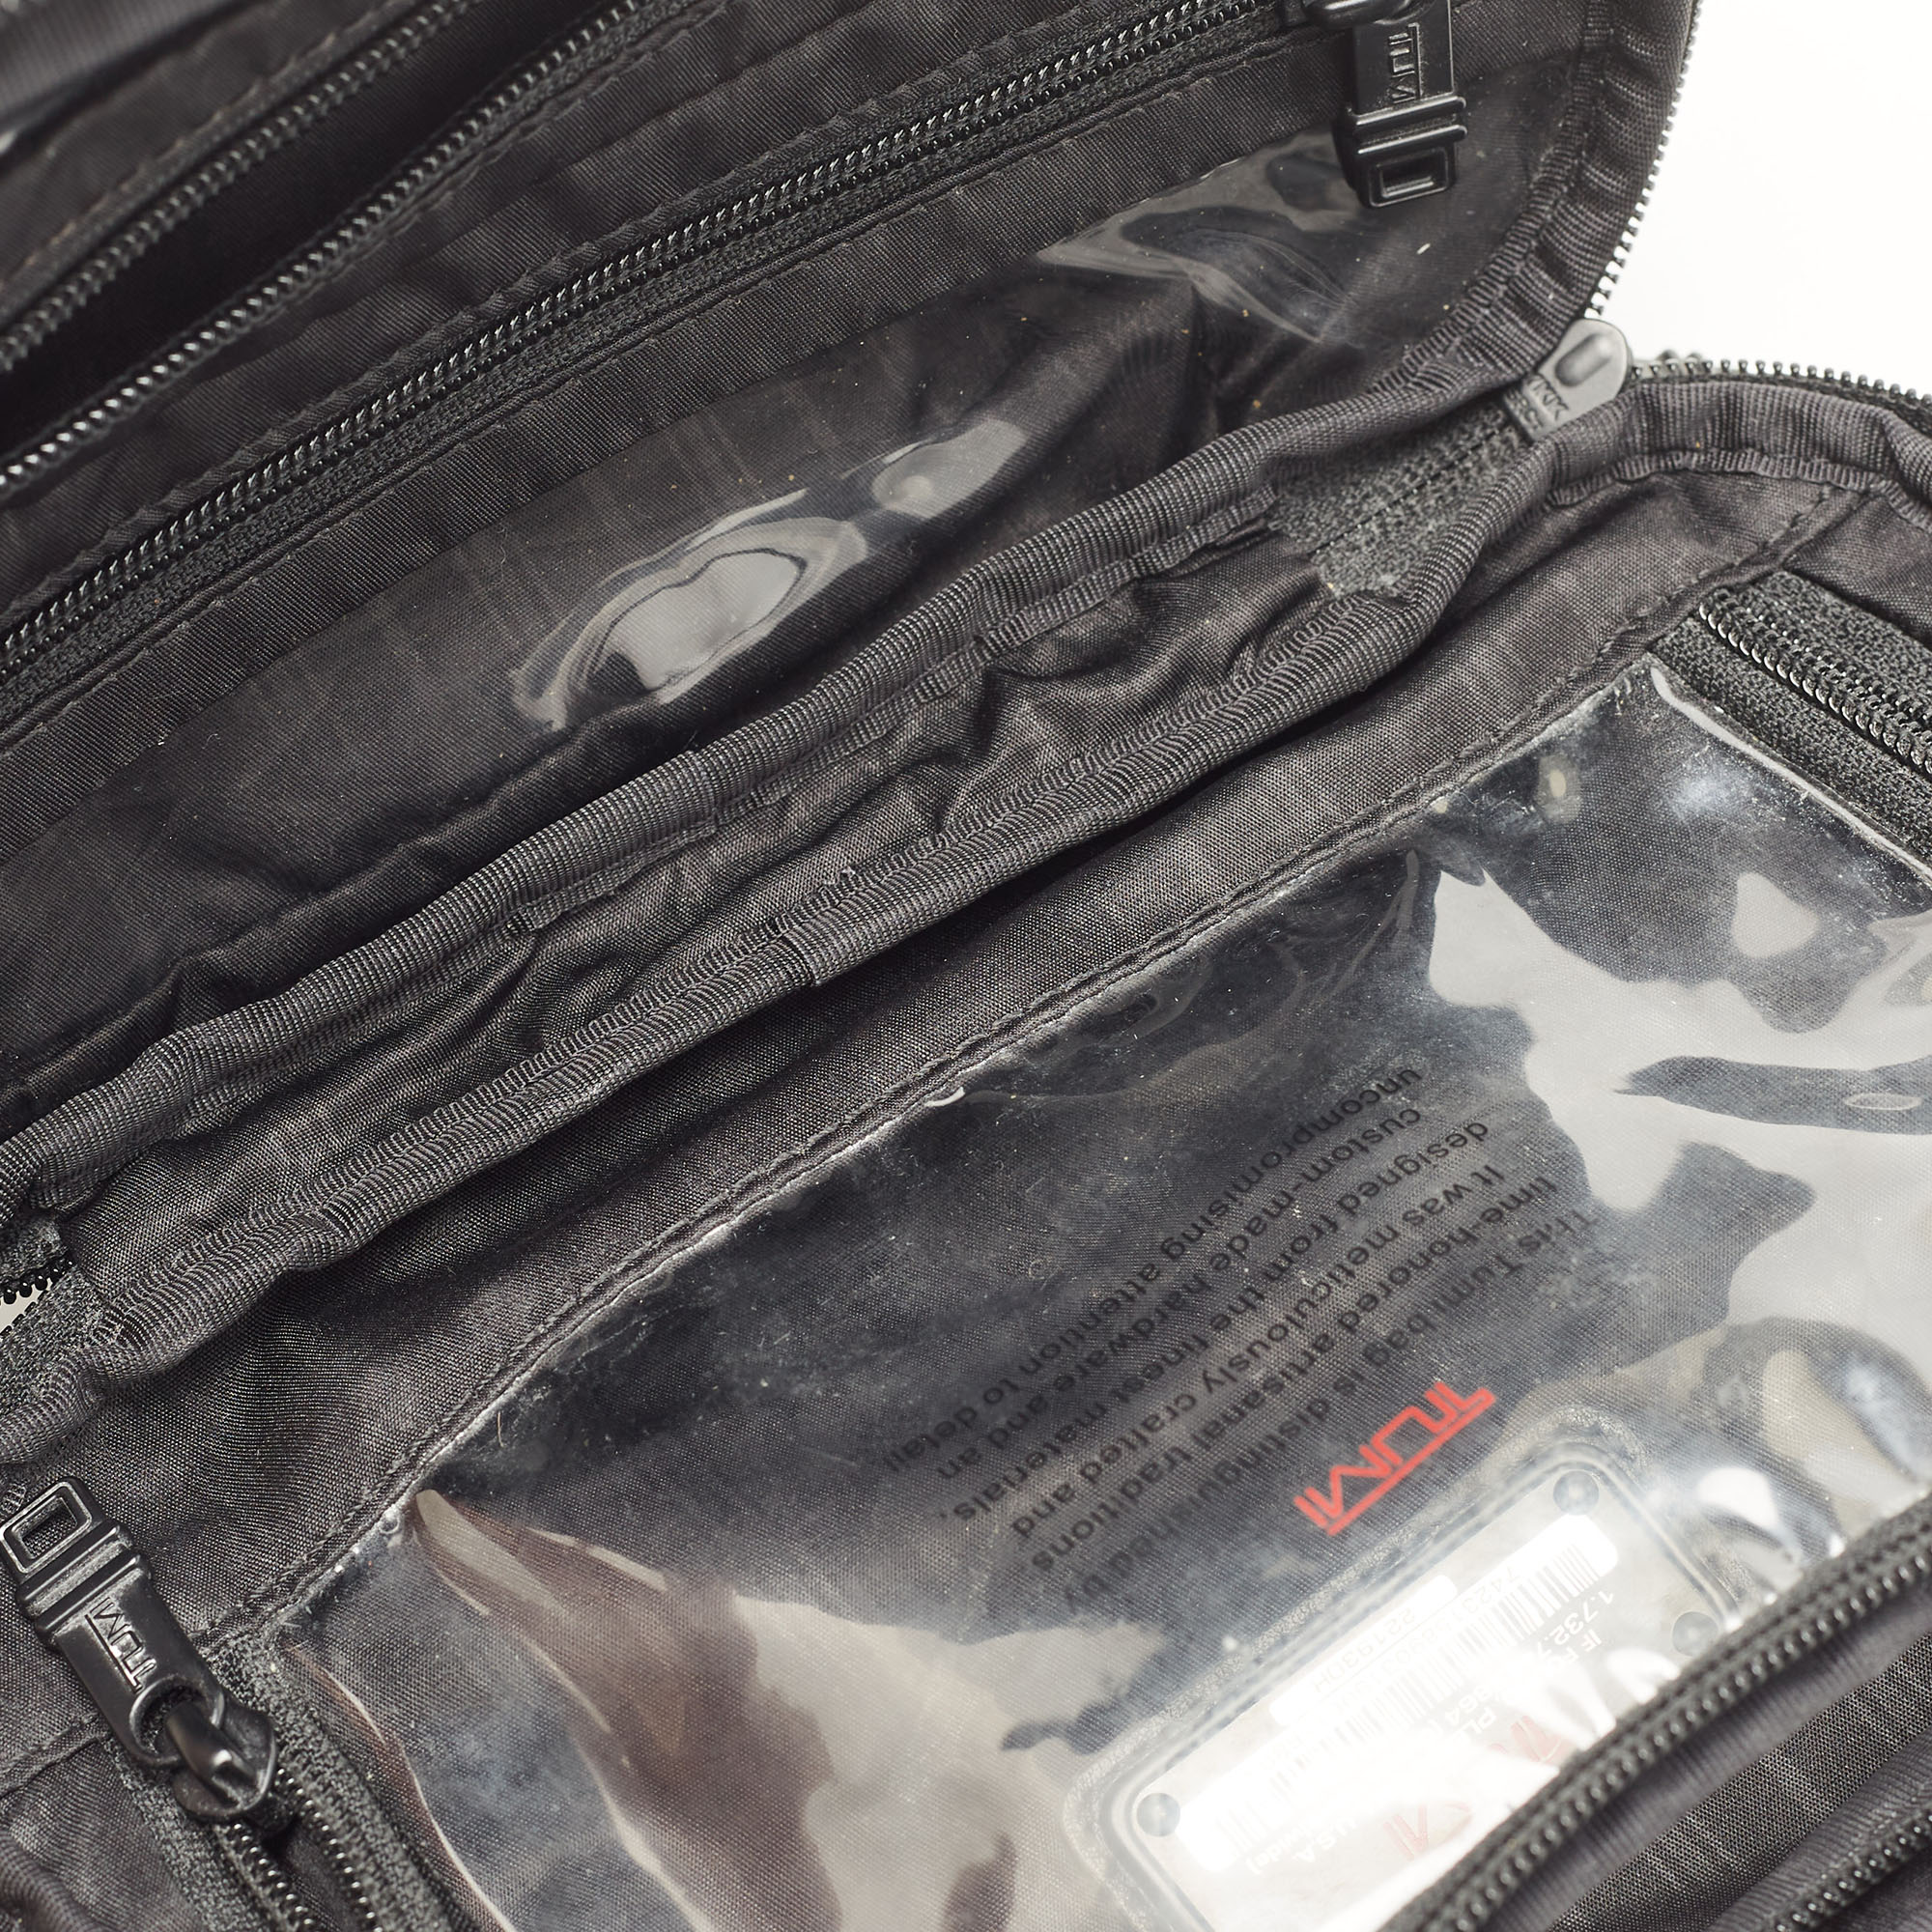 Tumi Black Nylon And Leather Zip Pouch